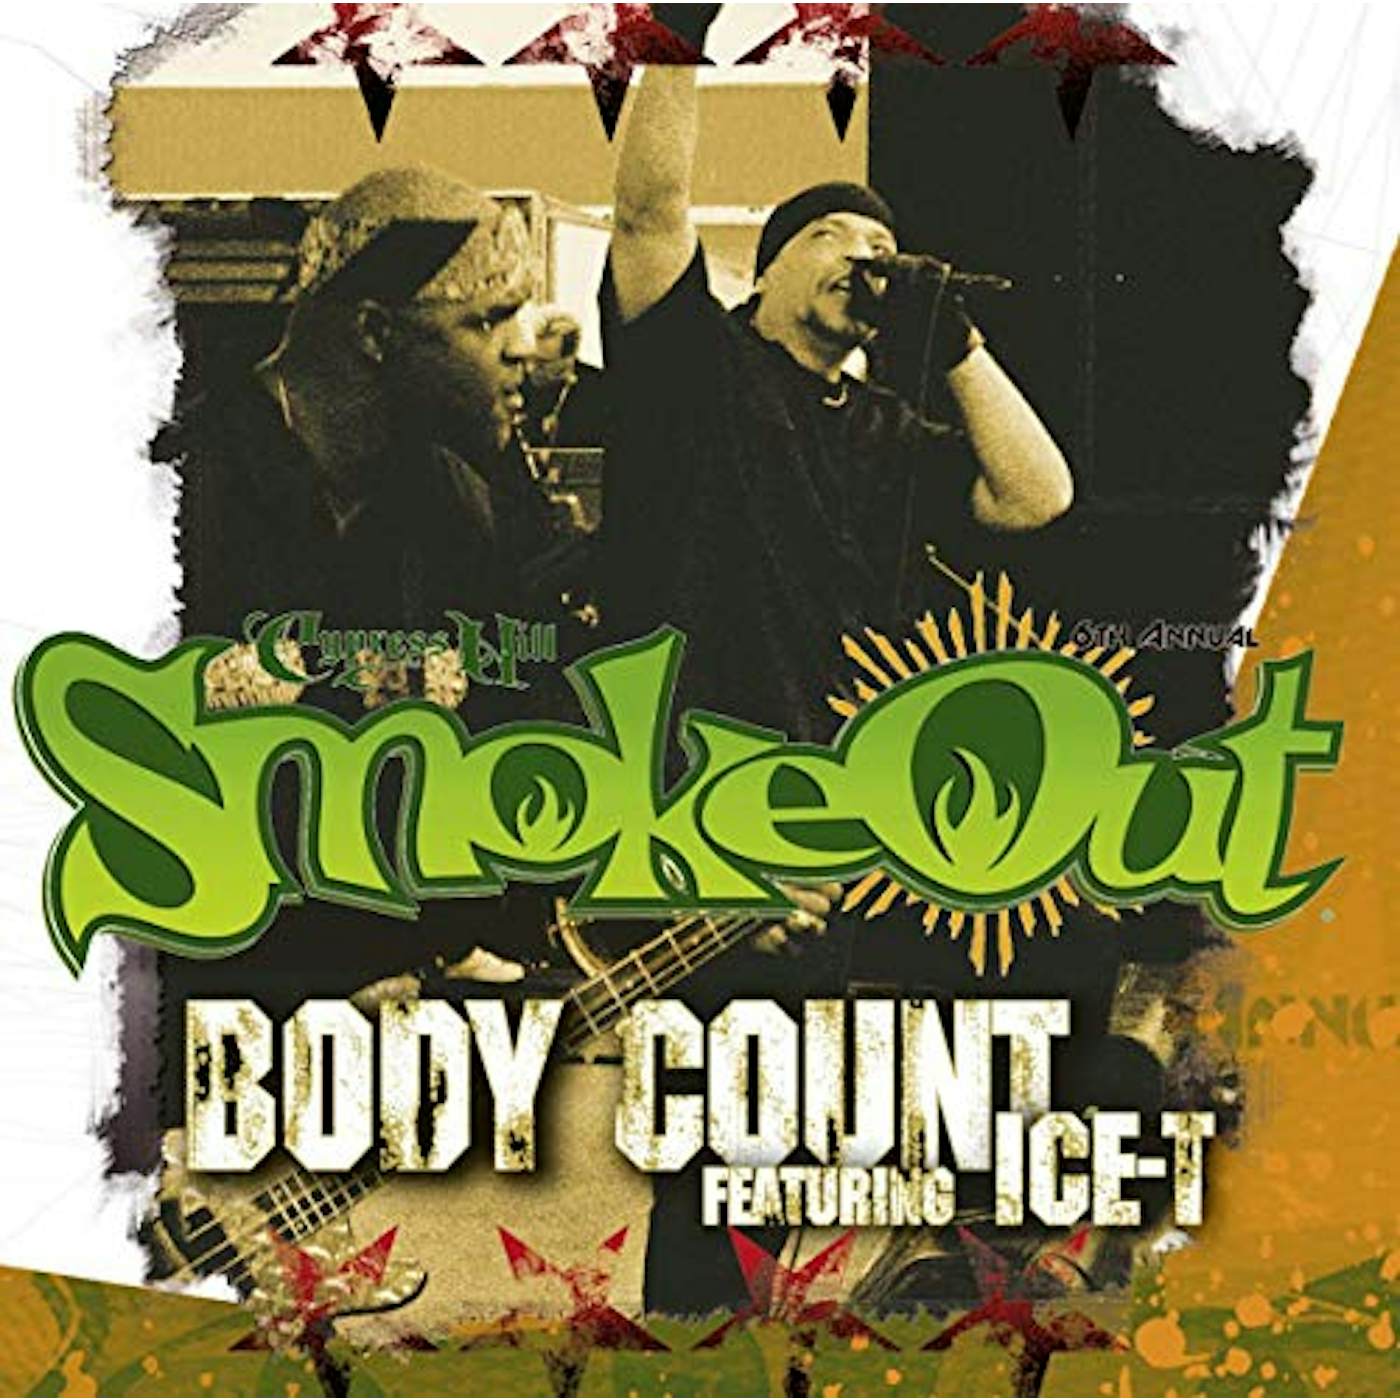 Body Count SMOKE OUT FESTIVAL PRESENTS CD